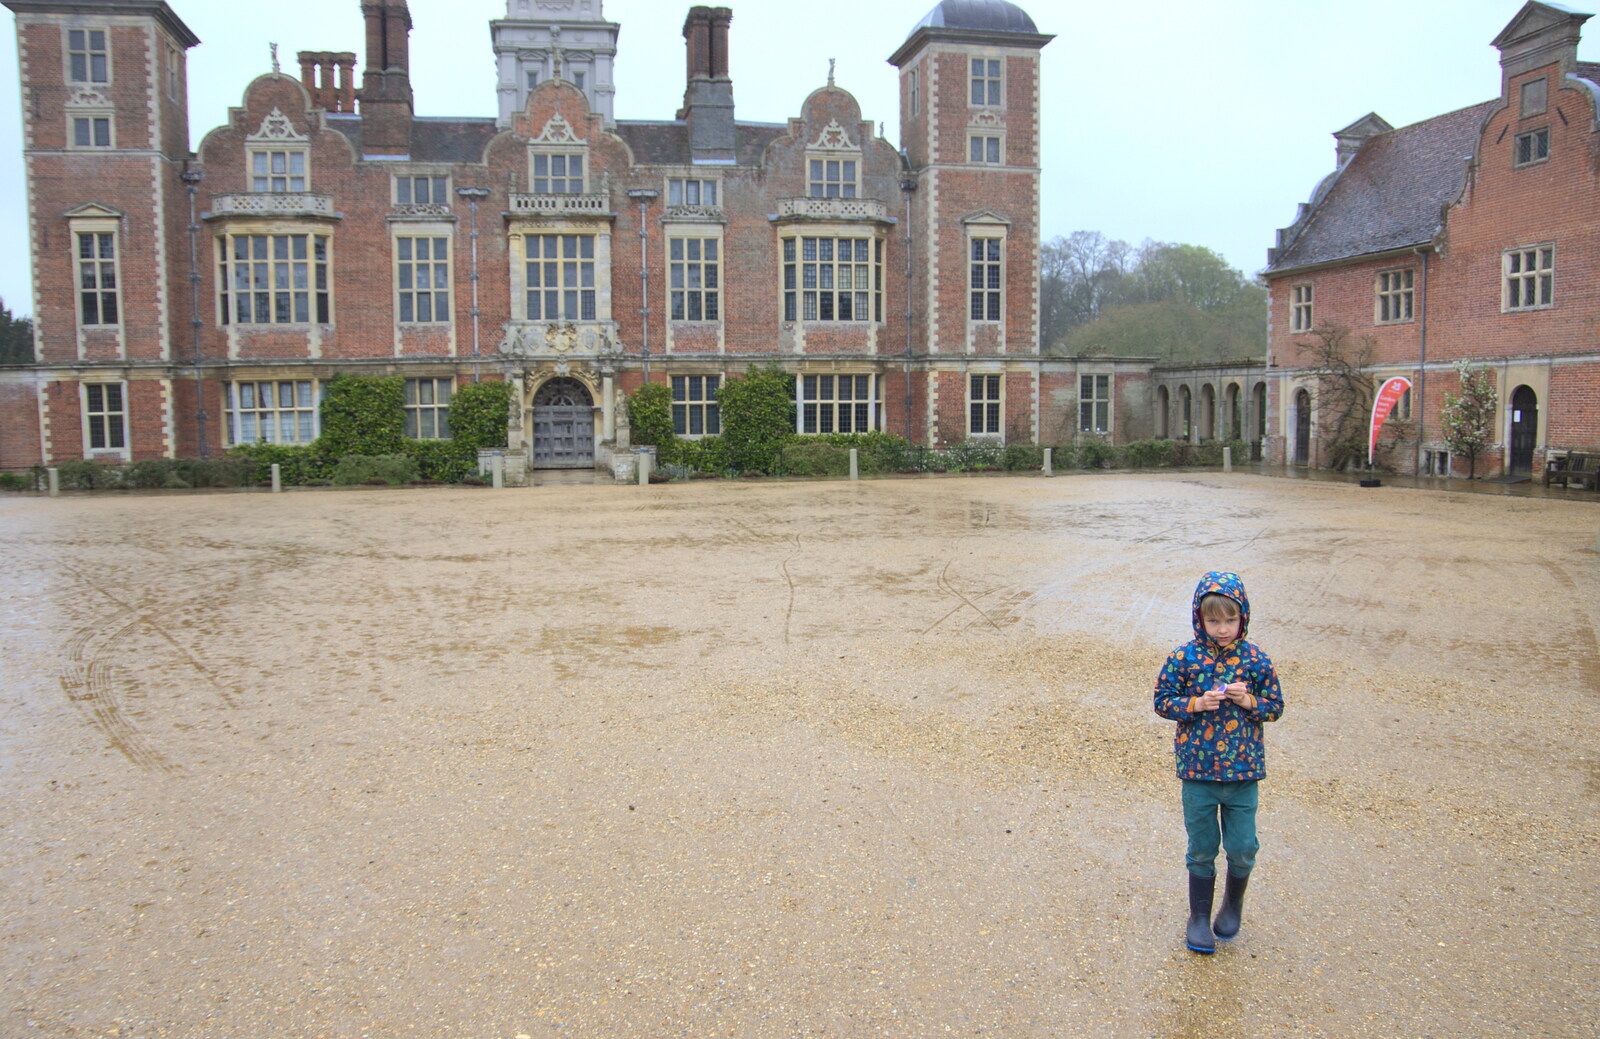 Harry stands around in sodden gravel from A Trip to Blickling Hall, Aylsham, Norfolk - 29th April 2018